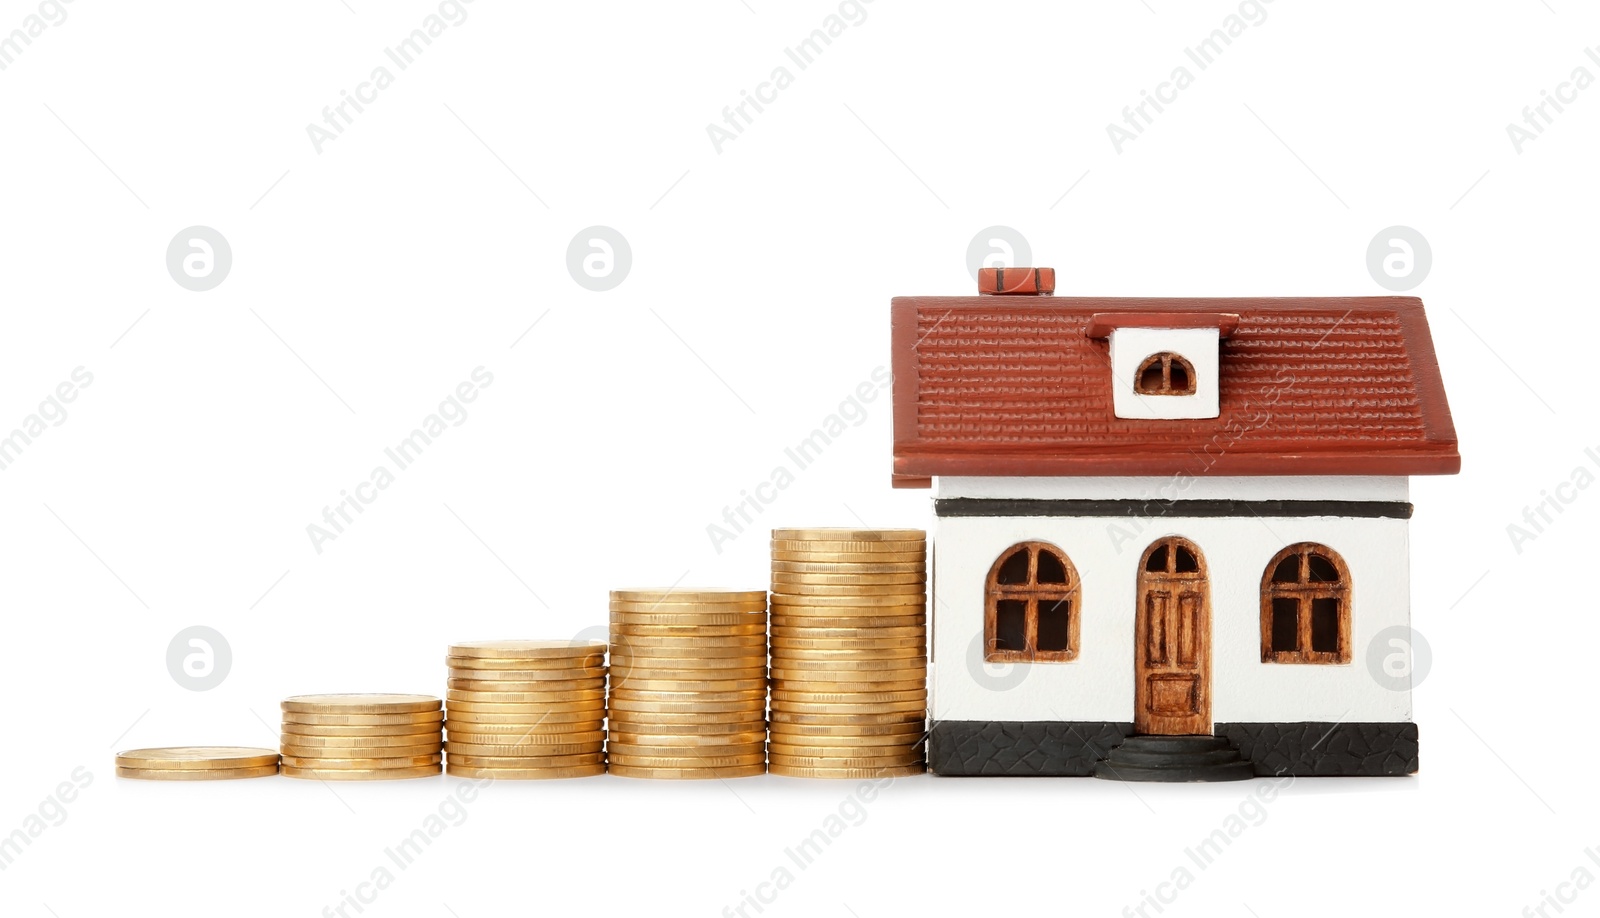 Photo of House model and coins on white background. Heating price concept